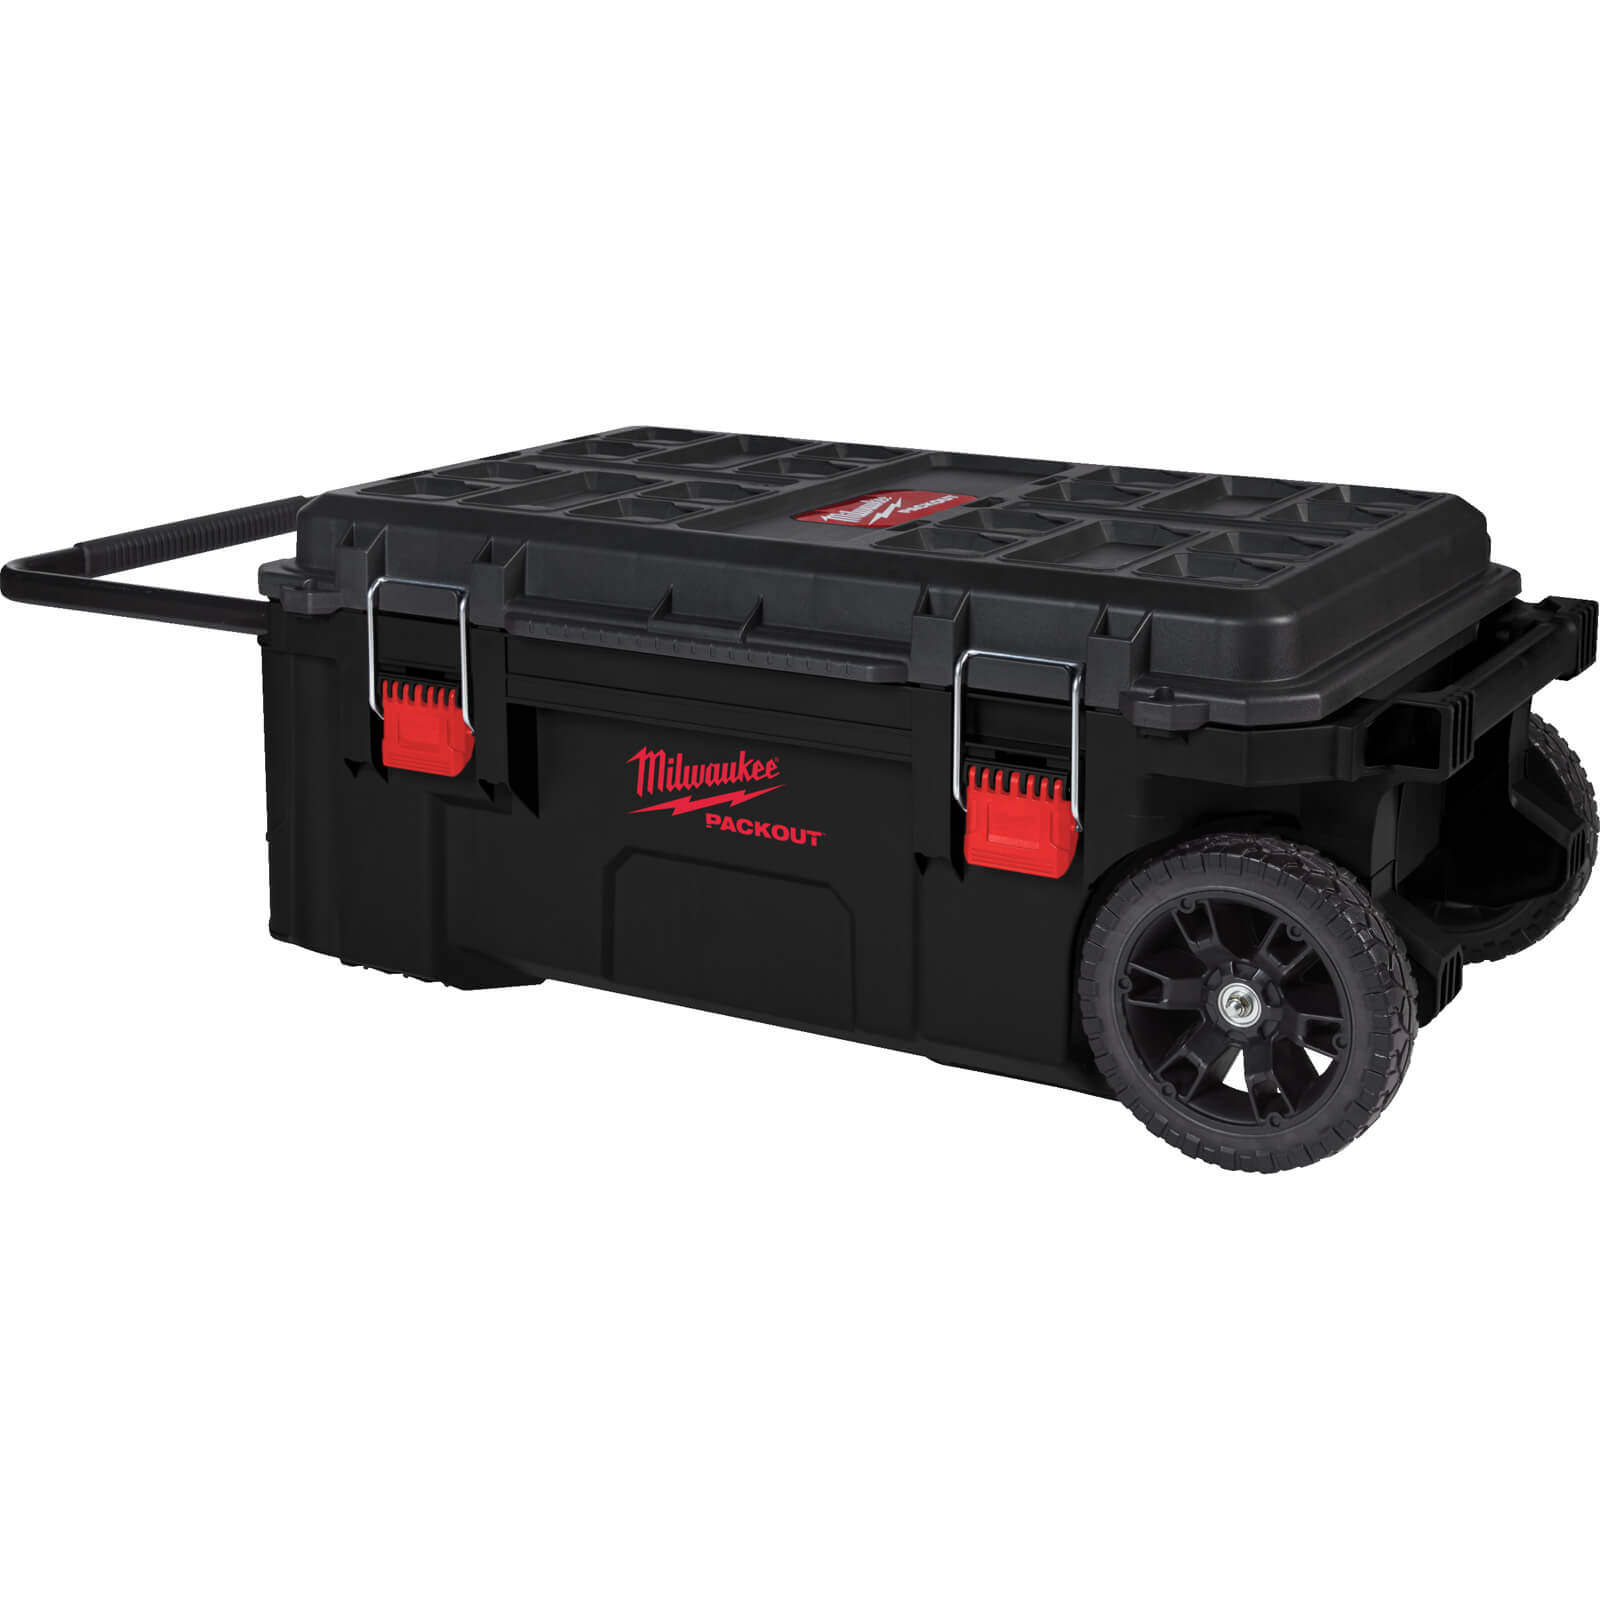 Image of Milwaukee Packout Rolling Tool Chest